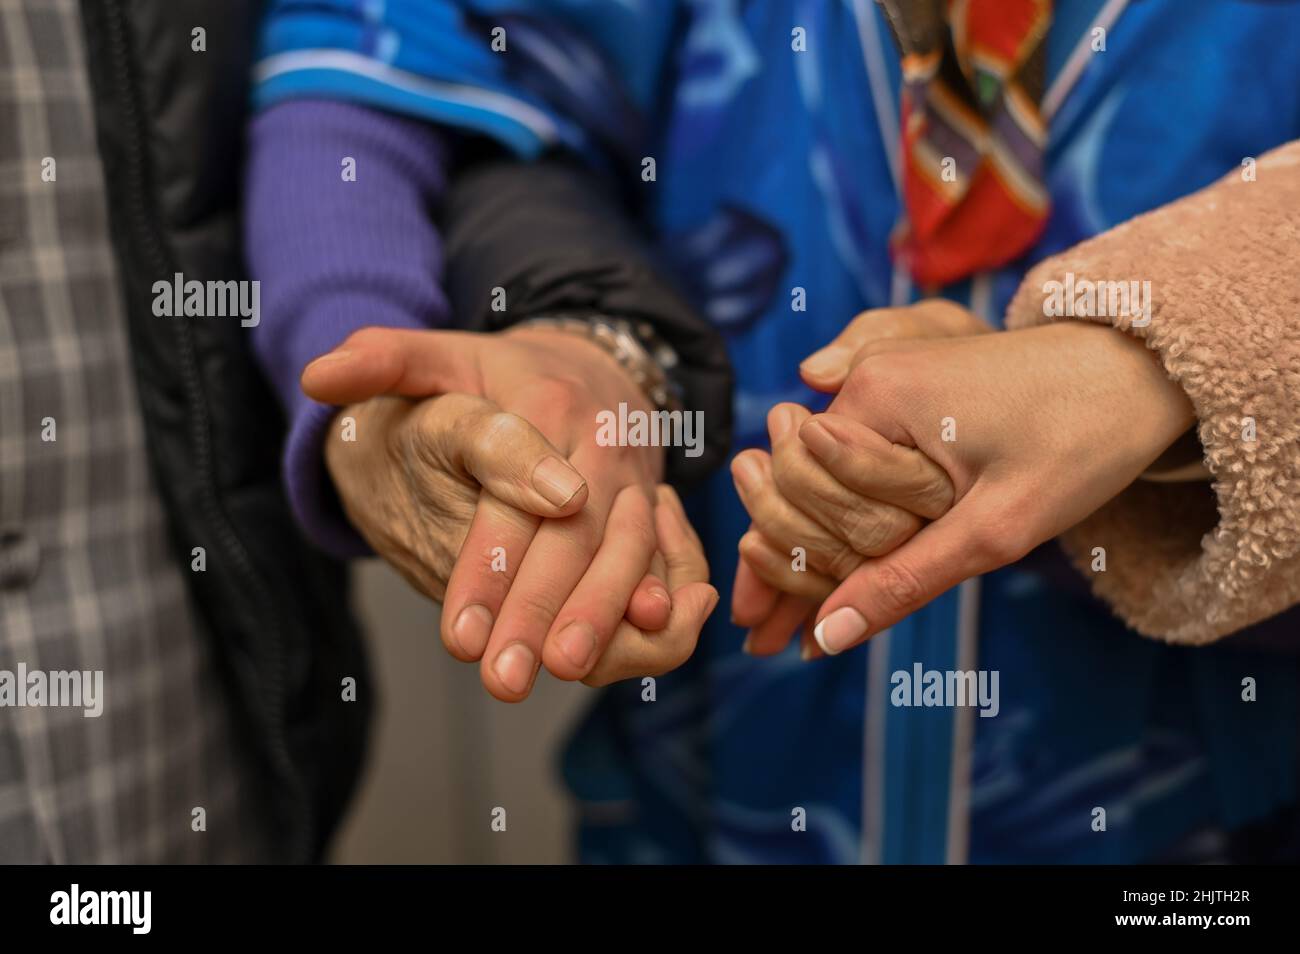 the grandmother holds the hands of a young man and a woman. close-up. old hands. Stock Photo